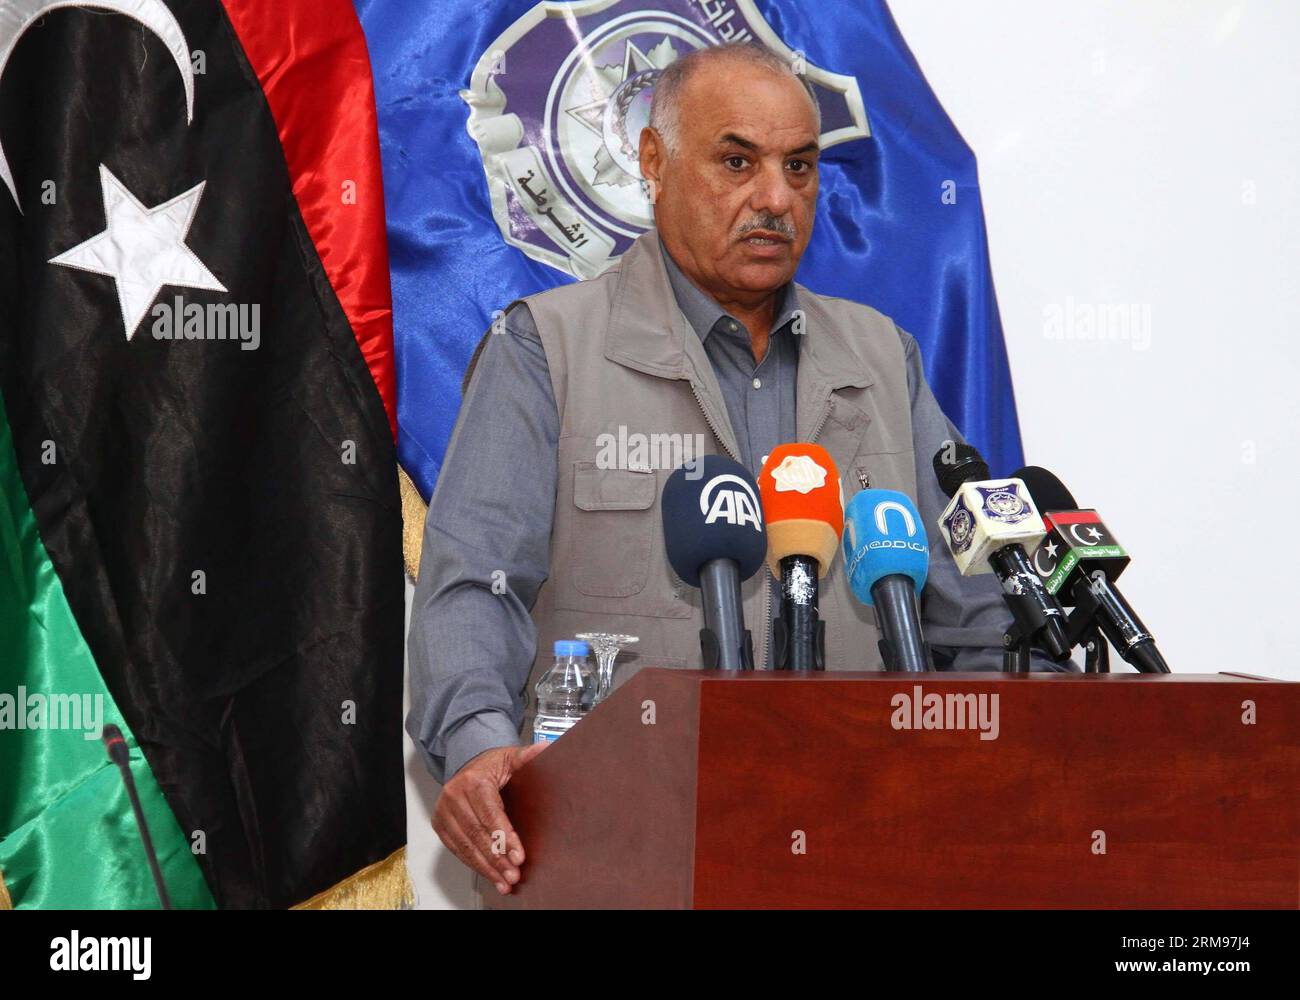 (140511) -- TRIPOLI, May 11, 2014 (Xinhua) -- Libyan Interior Minister-designate Saleh Maziq addresses a press conference in Tripoli, Libya, on May 11, 2014. Saleh Maziq stressed that the INTERPOL had expressed its readiness to help Libya recover stolen assets by former Gaddafi s regime during his visit to INTERPOL recently. (Xinhua/Hamza Turkia) LIBYA-TRIPOLI-POLITICS-INTERPOL-COOPERATION PUBLICATIONxNOTxINxCHN   Tripoli May 11 2014 XINHUA Libyan Interior Ministers Designate Saleh  addresses a Press Conference in Tripoli Libya ON May 11 2014 Saleh  stressed Thatcher The Interpol had expressed Stock Photo